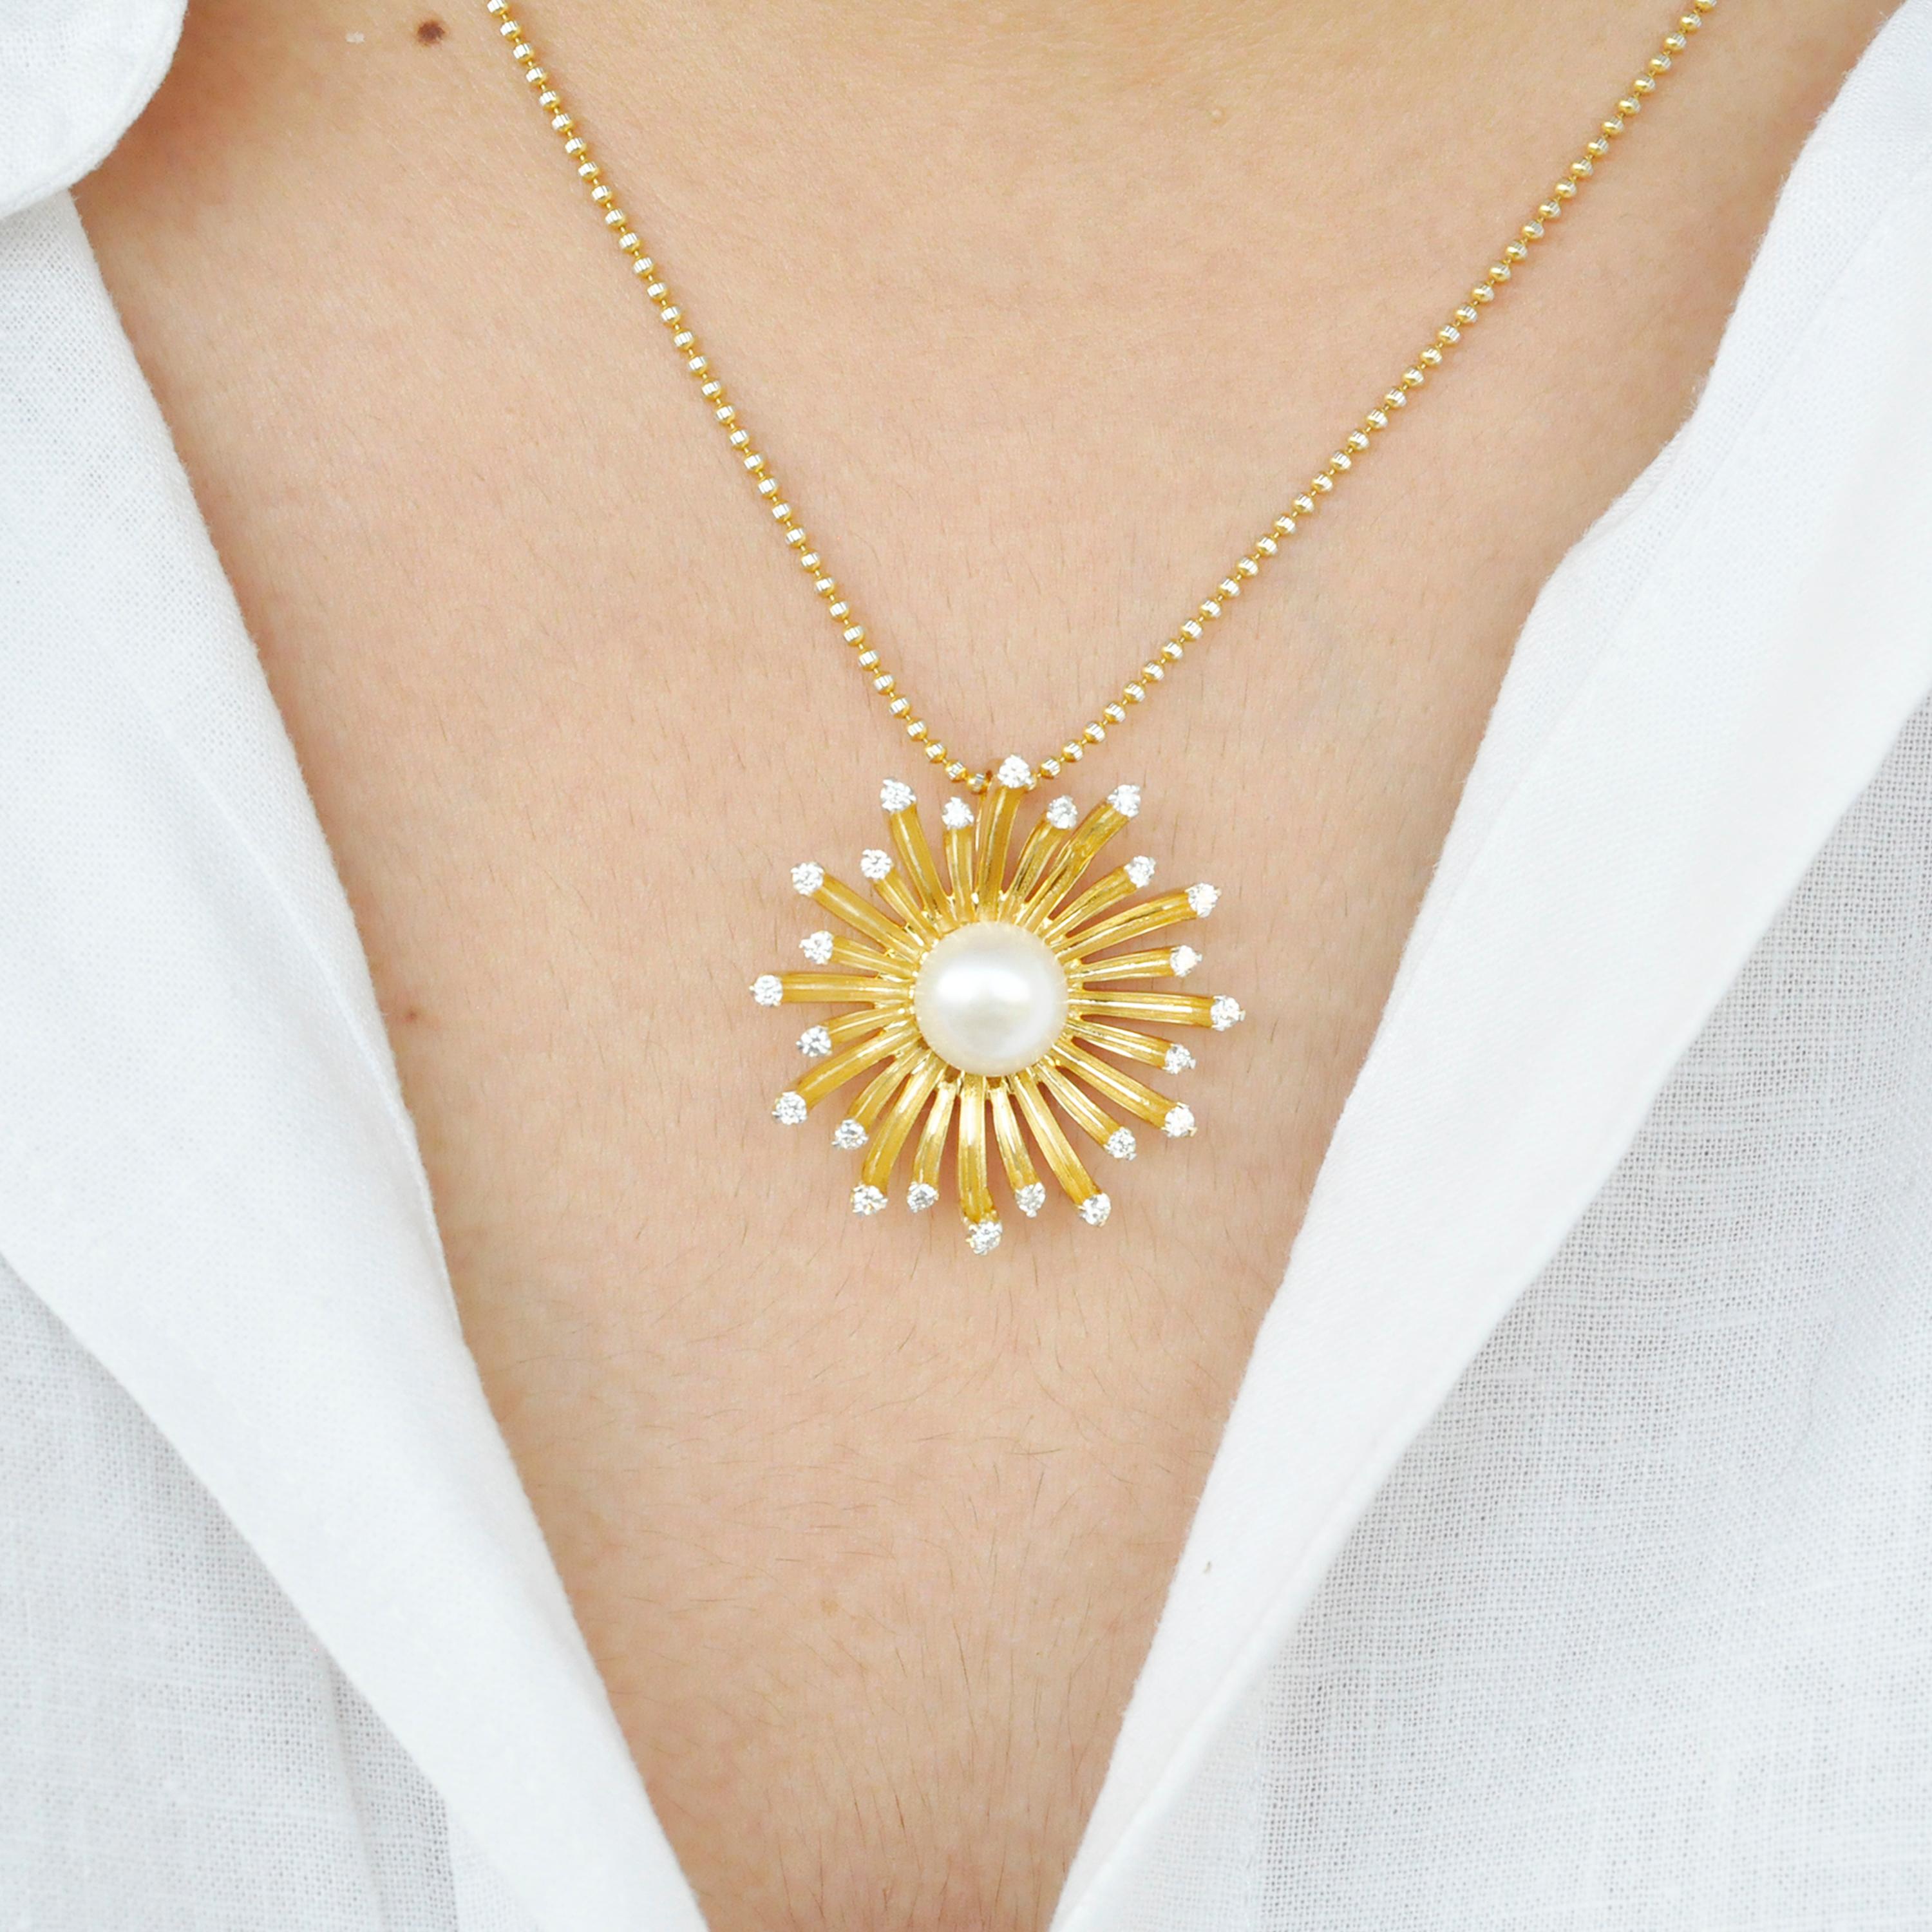 This 18 karat gold diamond pendant necklace is shaped like a blooming flower. The gold in the petals are textured to give it a natural effect, along with the diamonds on the top. A cultured round pearl sitting in the centre adds to the overall